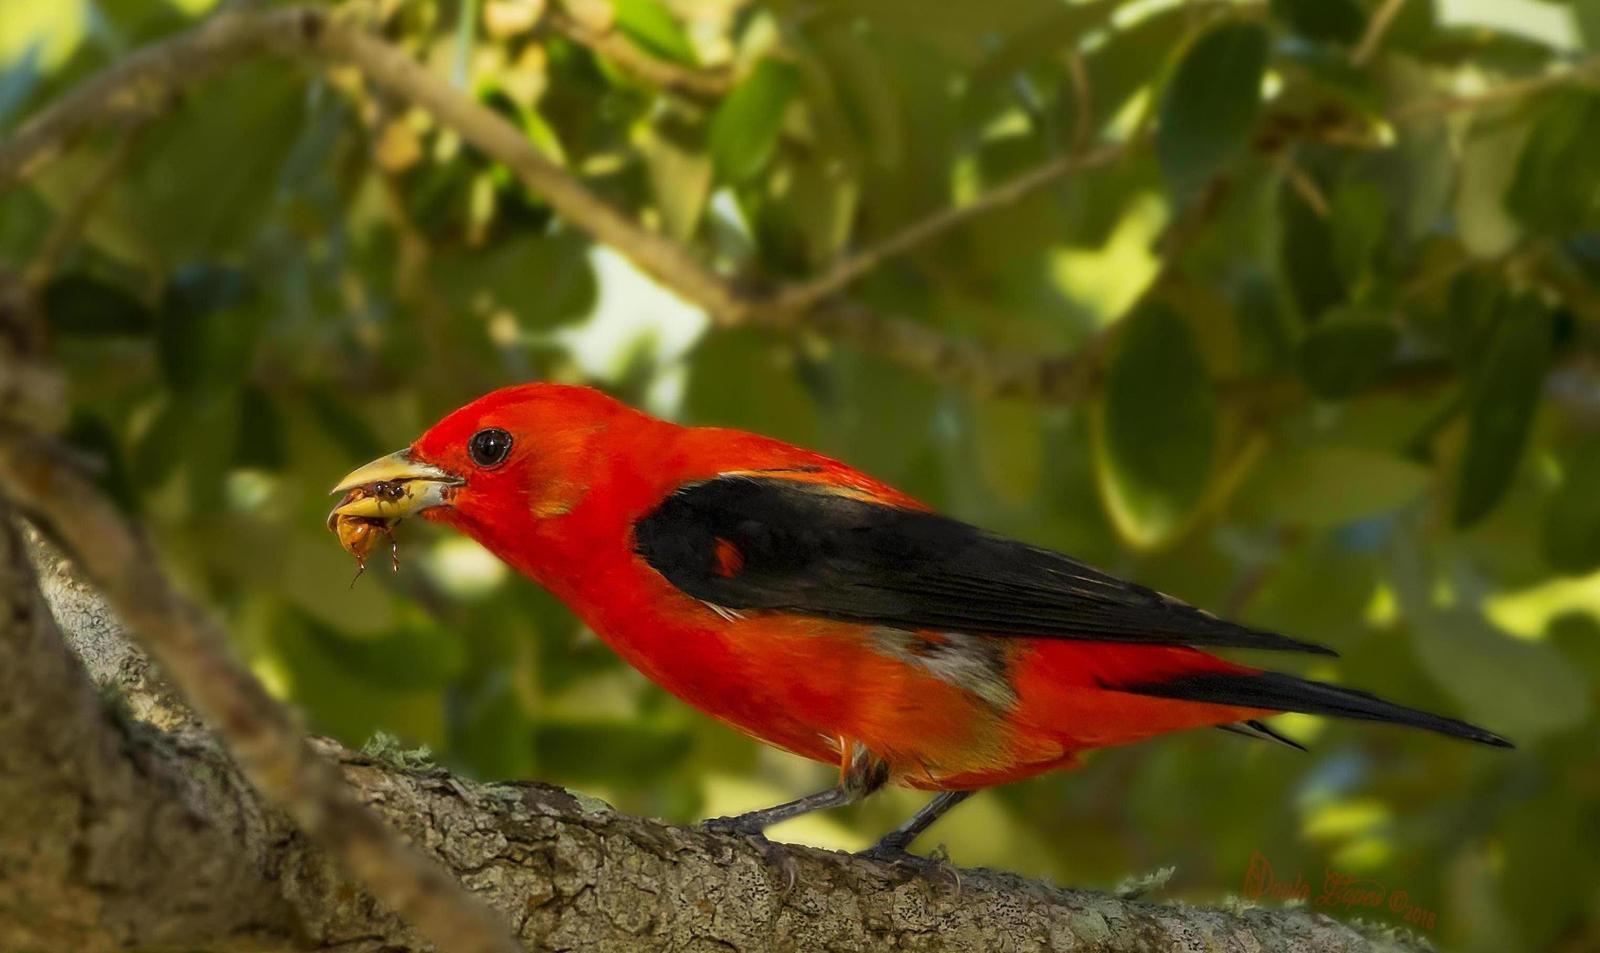 Scarlet Tanager Photo by PAULA LOPES